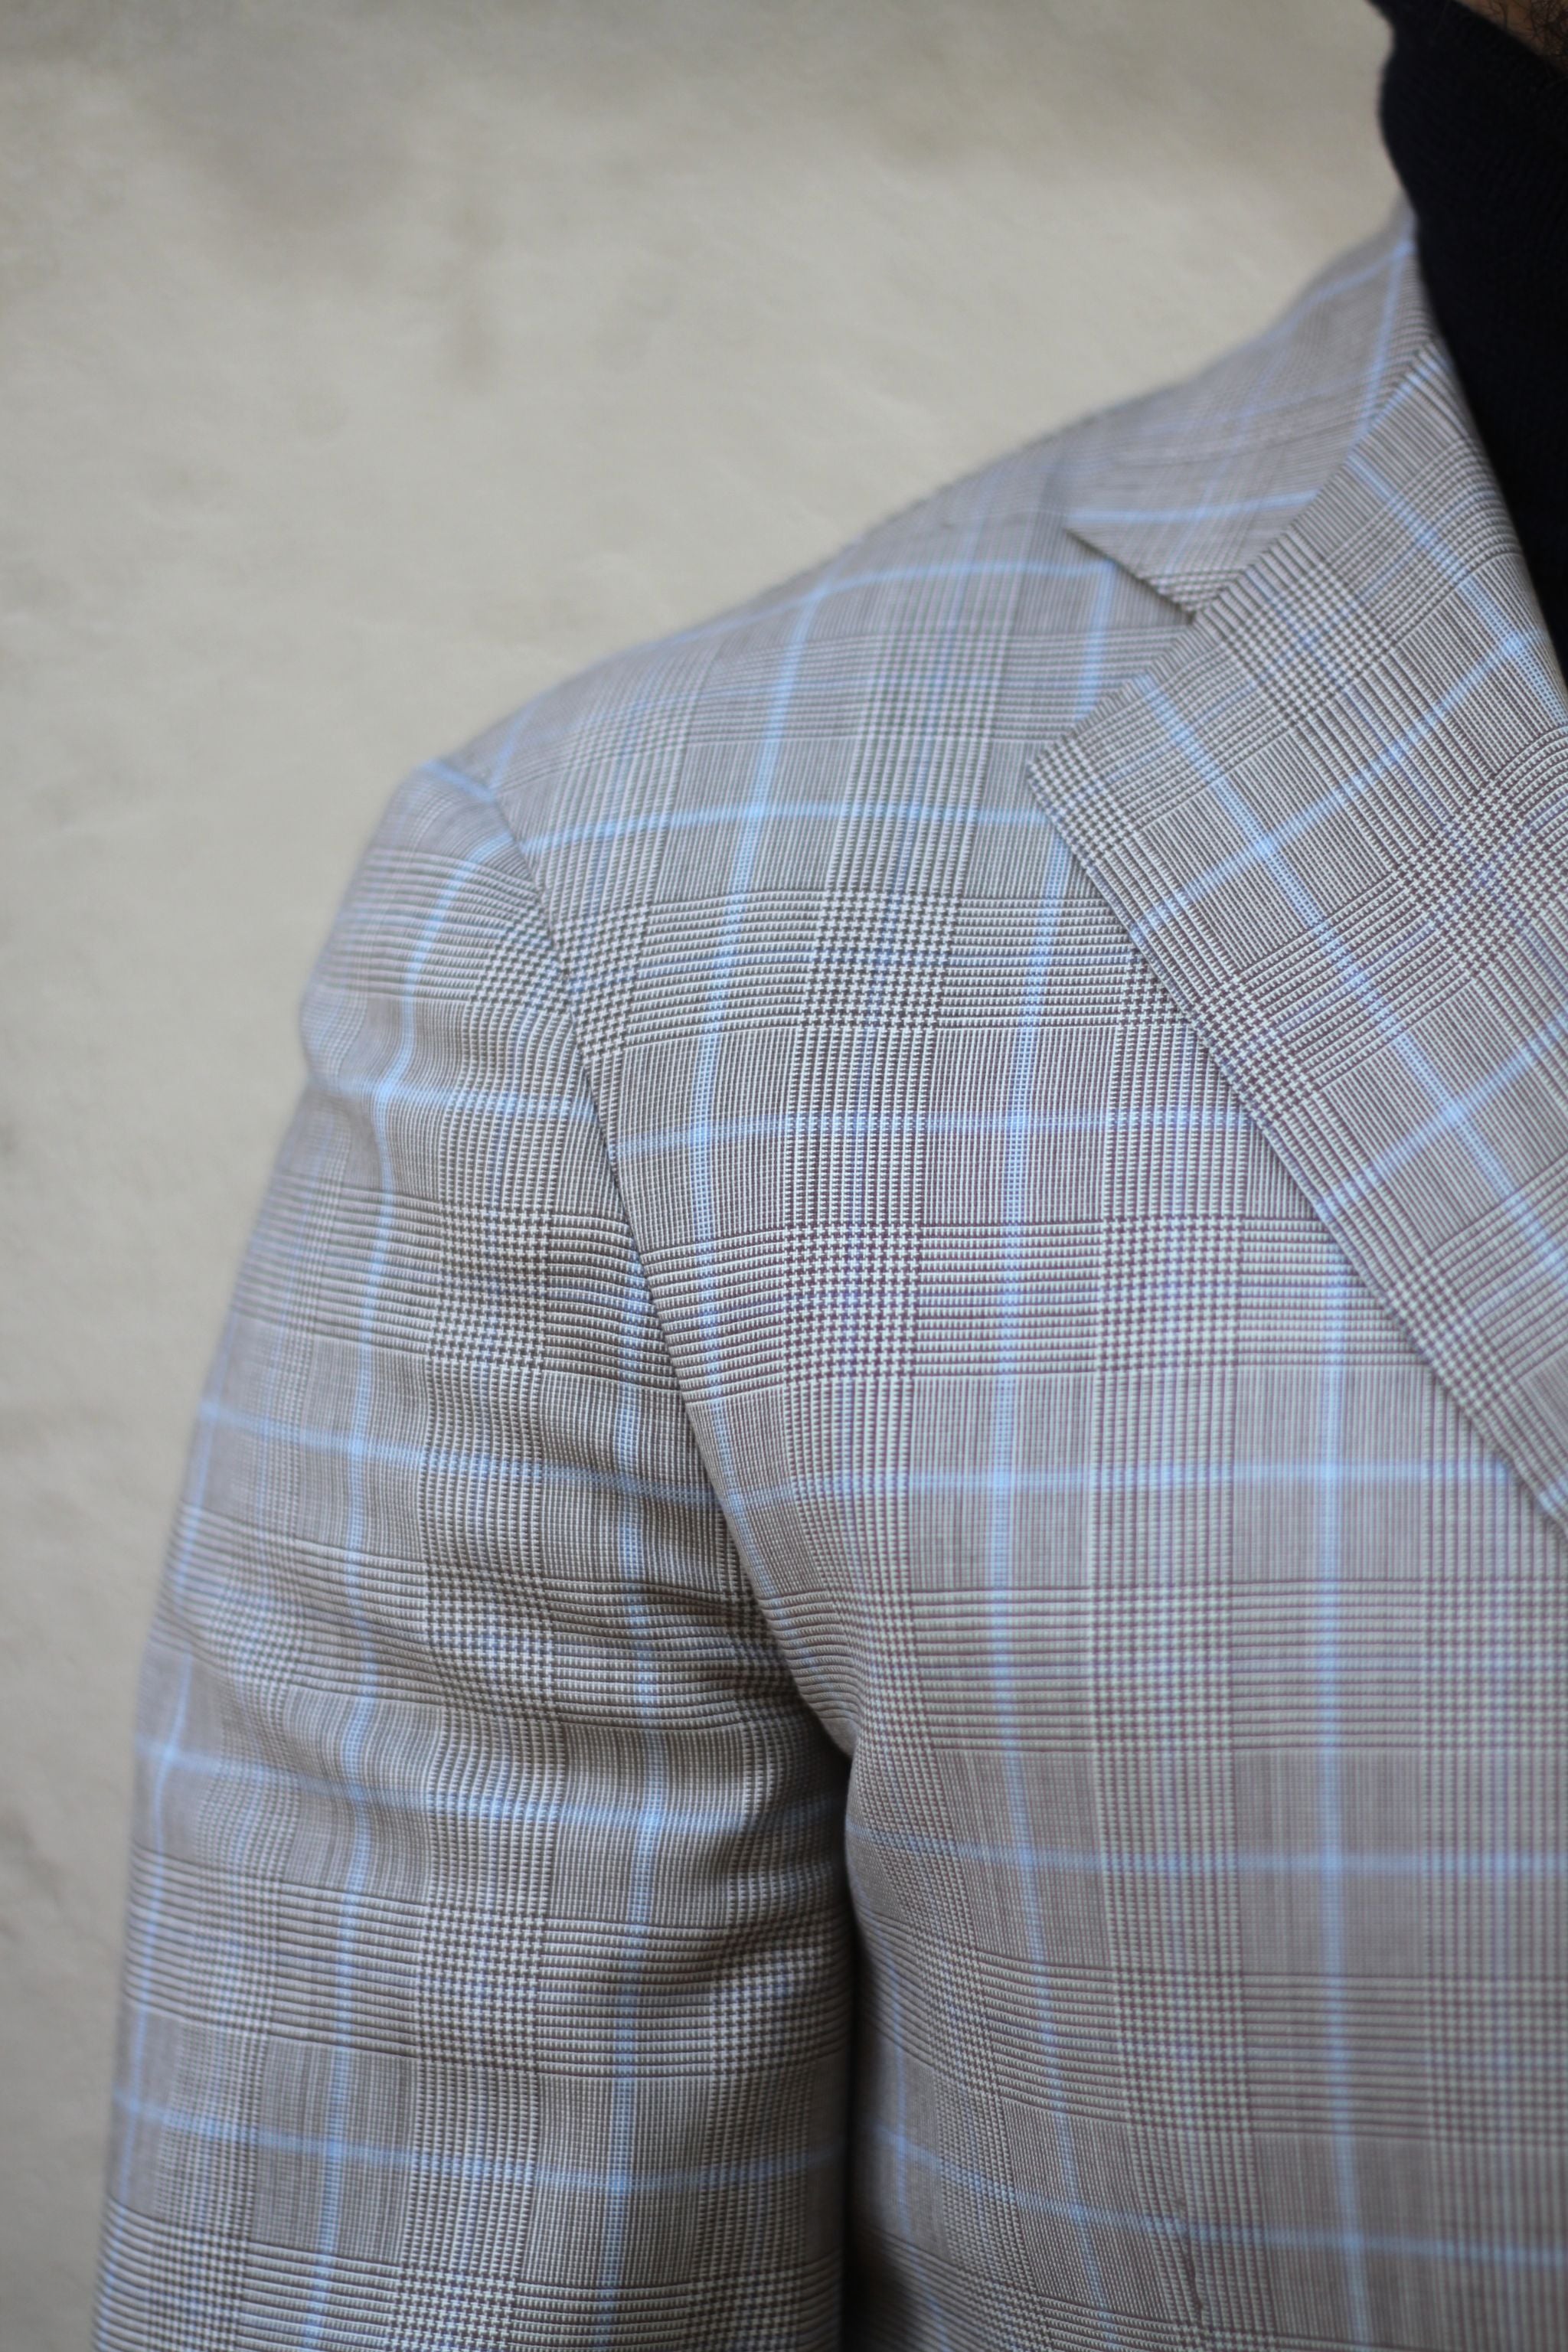 Checked sport coat details